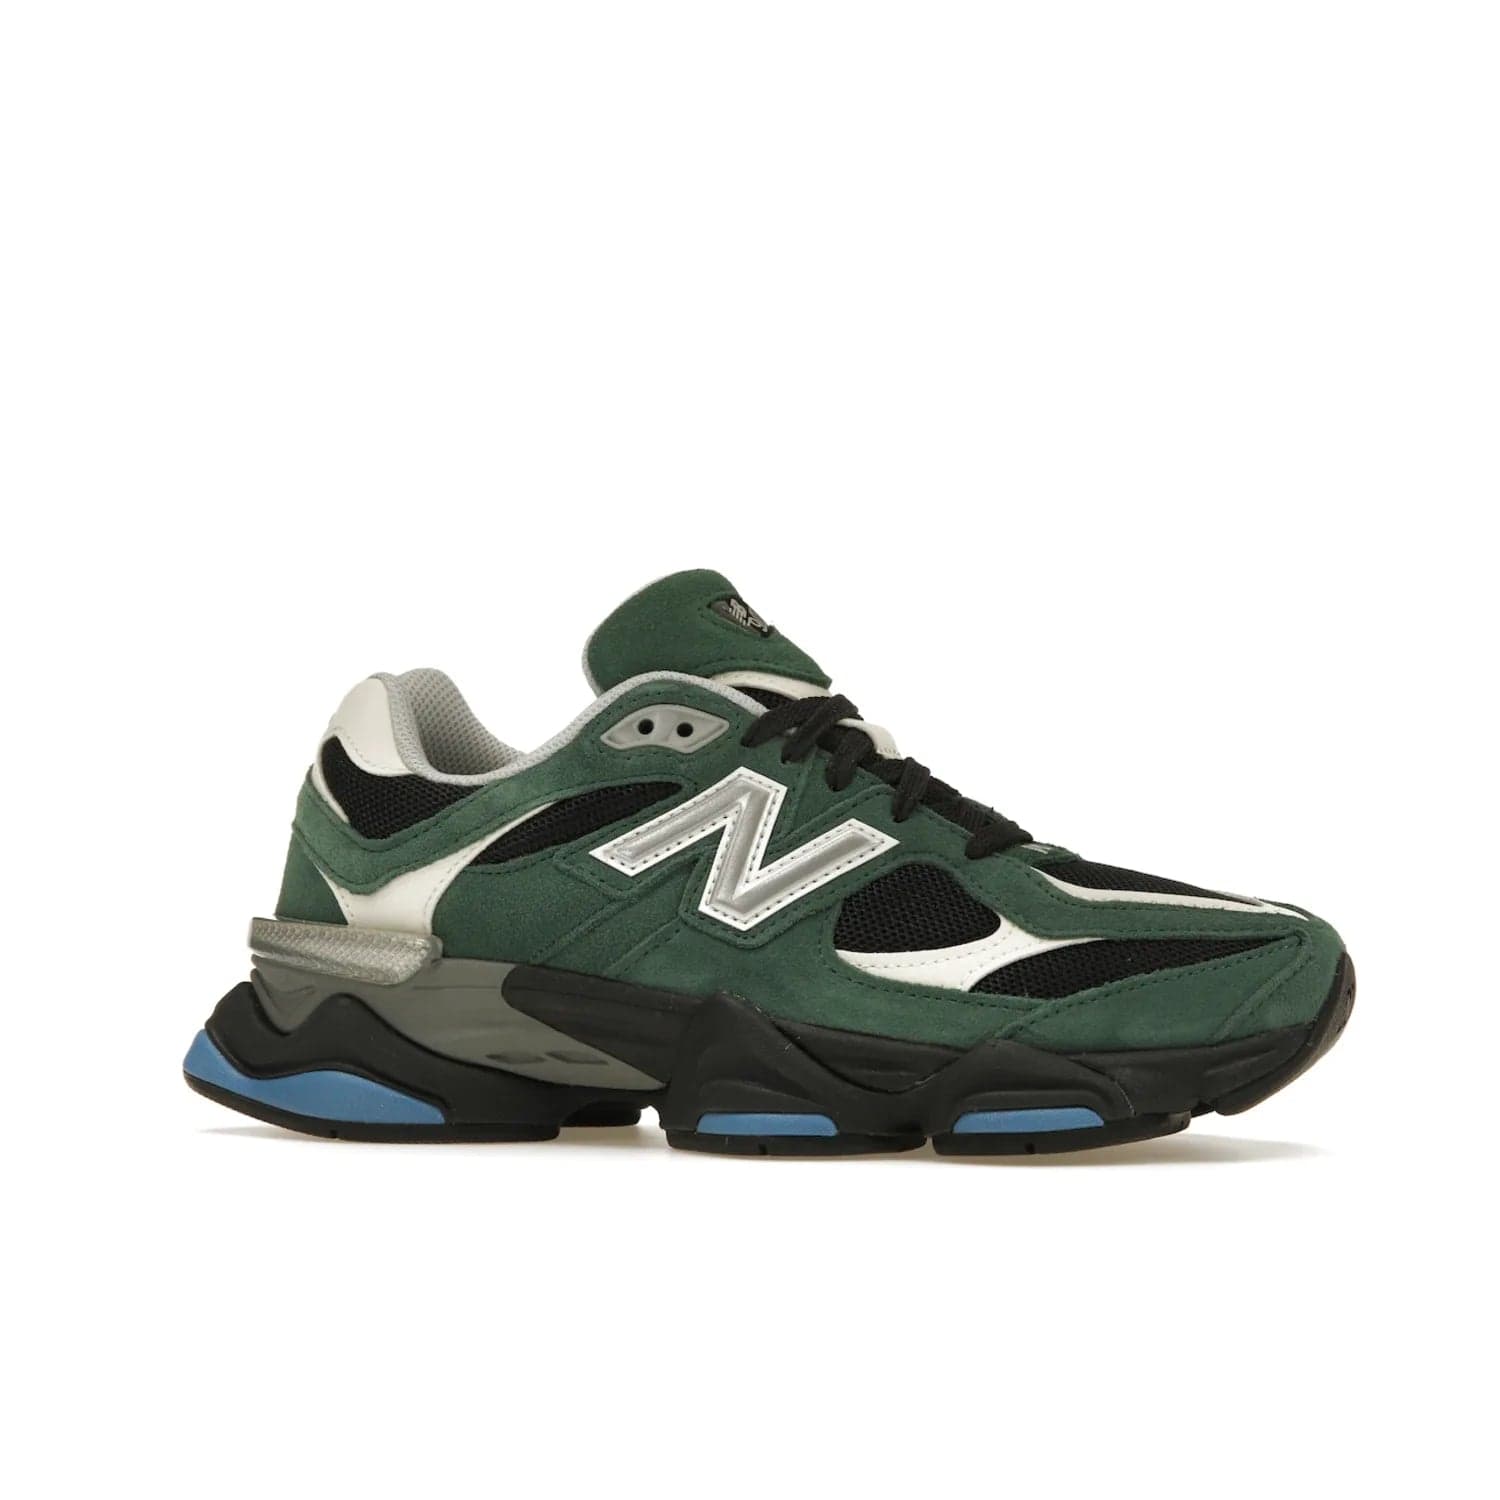 New Balance 9060 Team Forest Green - Image 3 - Only at www.BallersClubKickz.com - Introducing the New Balance 9060 Team Forest Green! Durable statement sneaker with a vibrant forest green upper and contrast detailing. Release date 2023-04-04 - don't miss out!